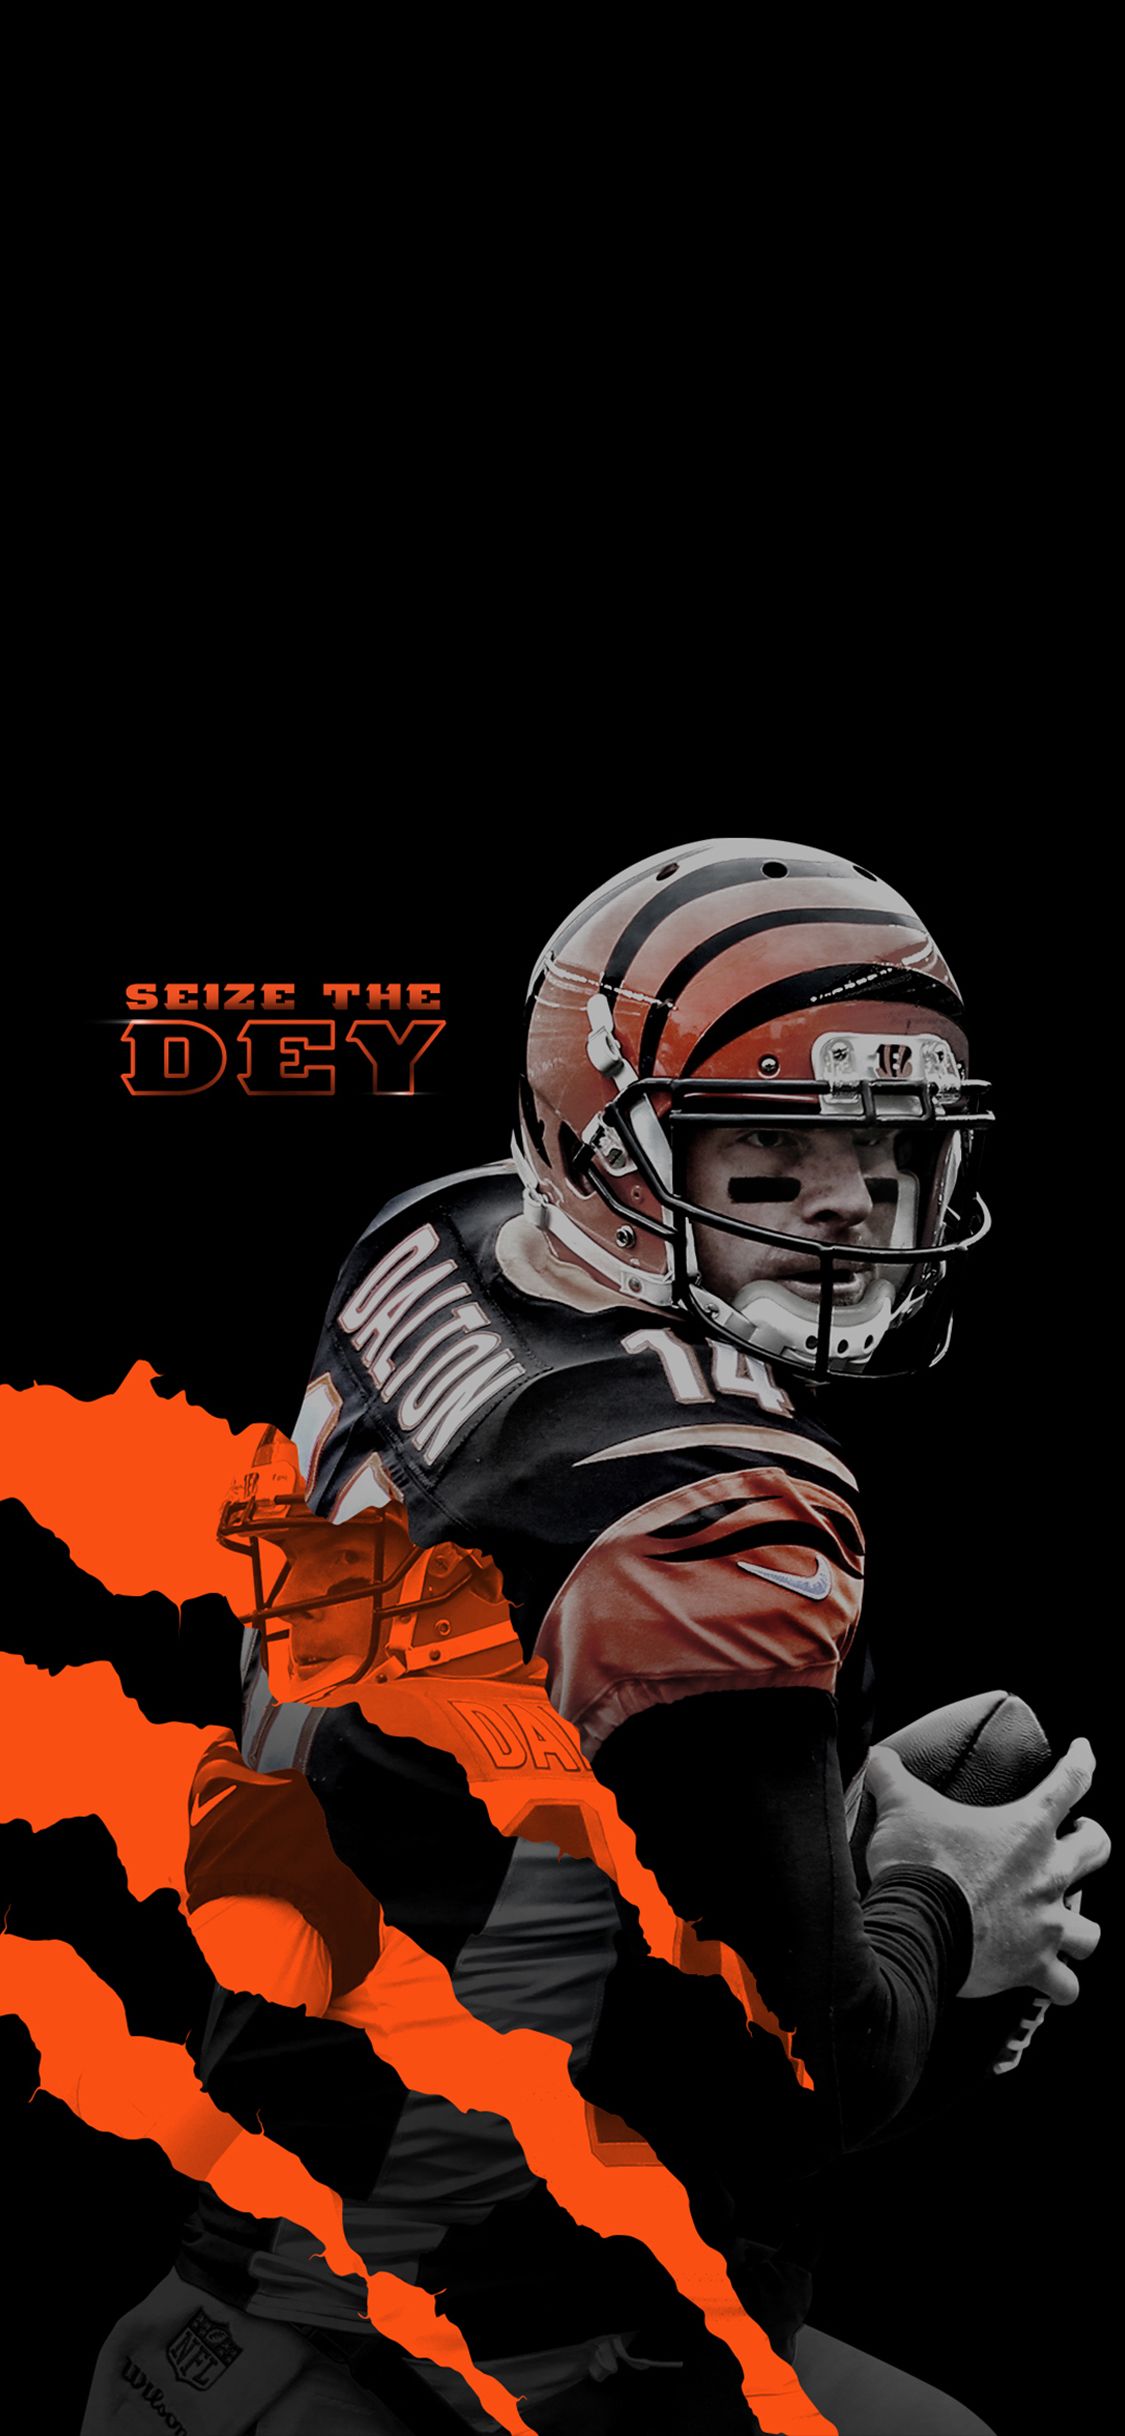 The Official Site of the Cincinnati Bengals